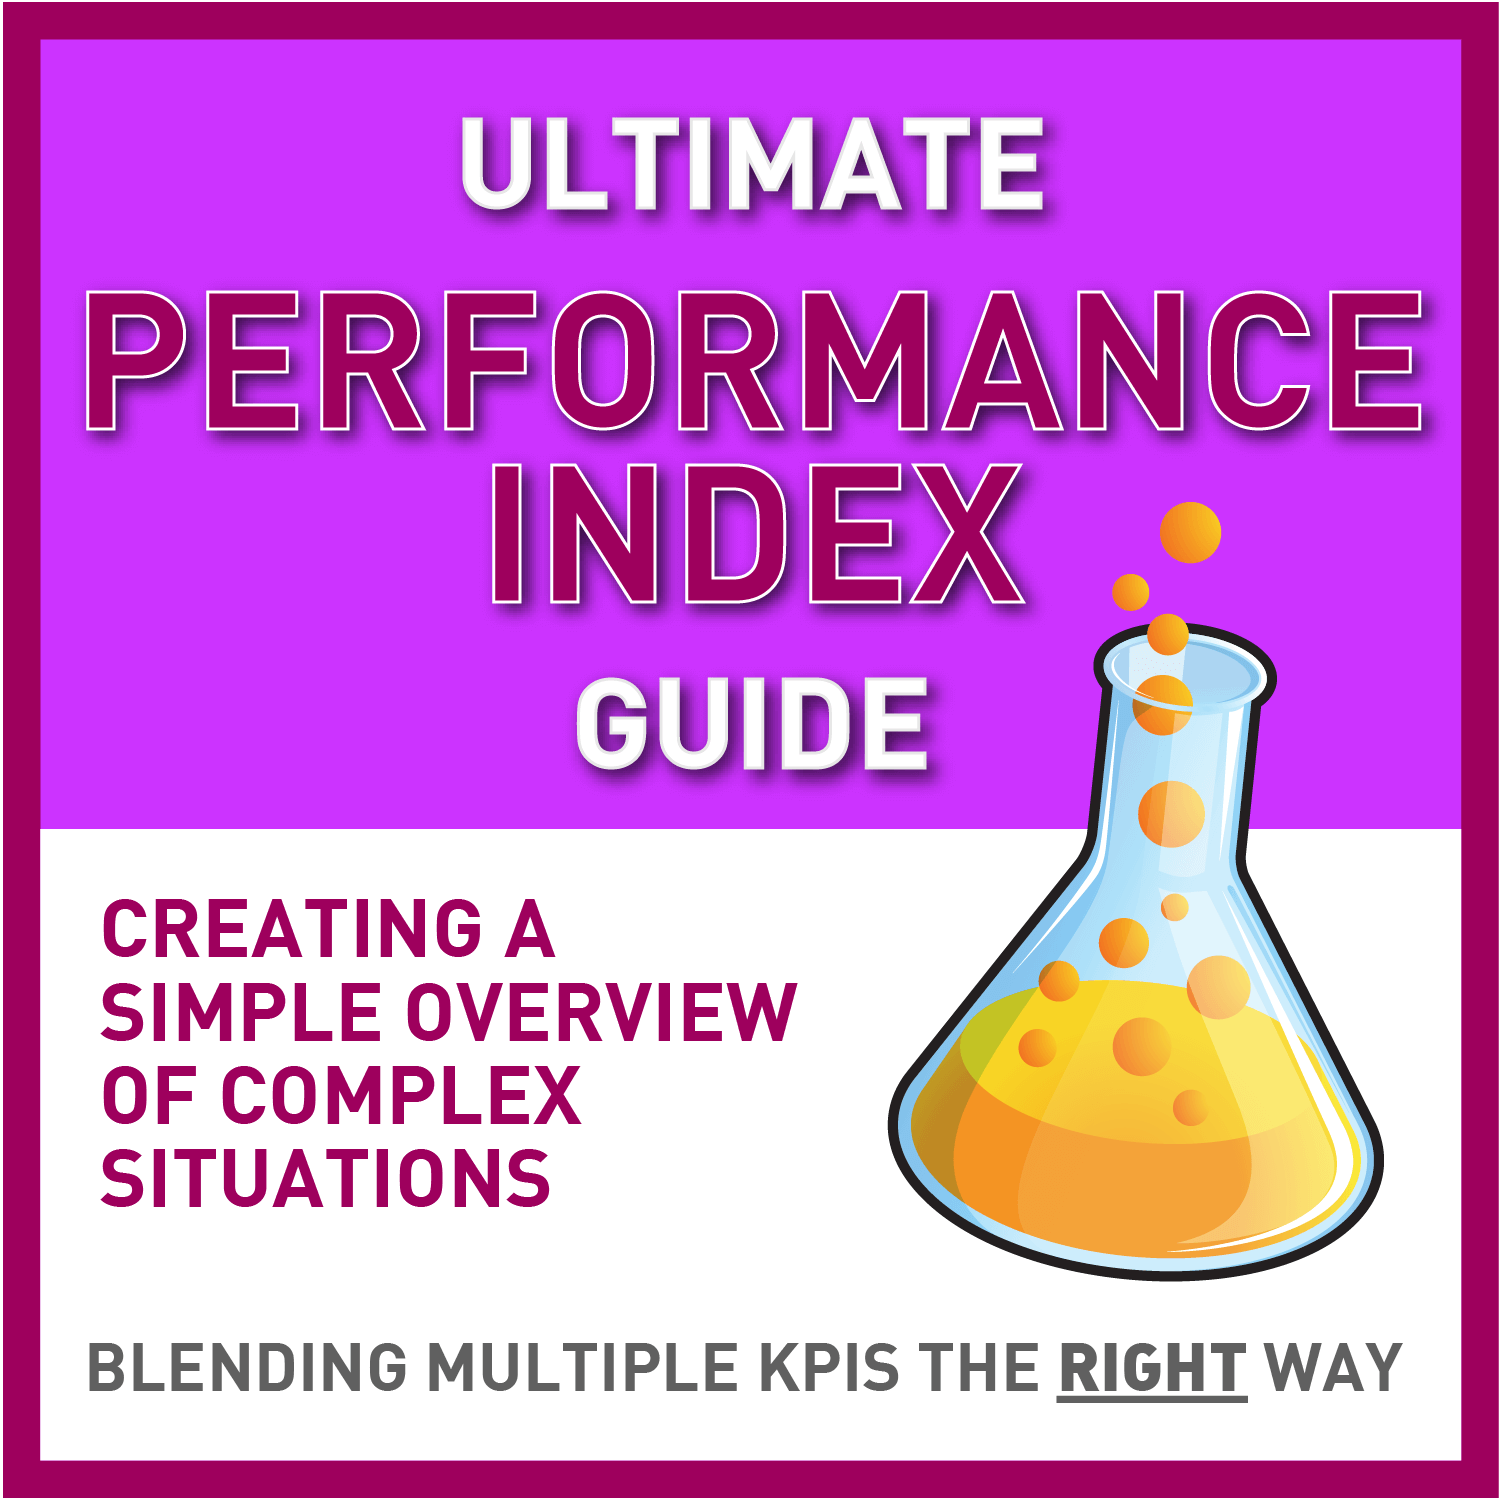 Ultimate Performance Index Guide – square_Ultimate Performance Index Guide – Square Advert